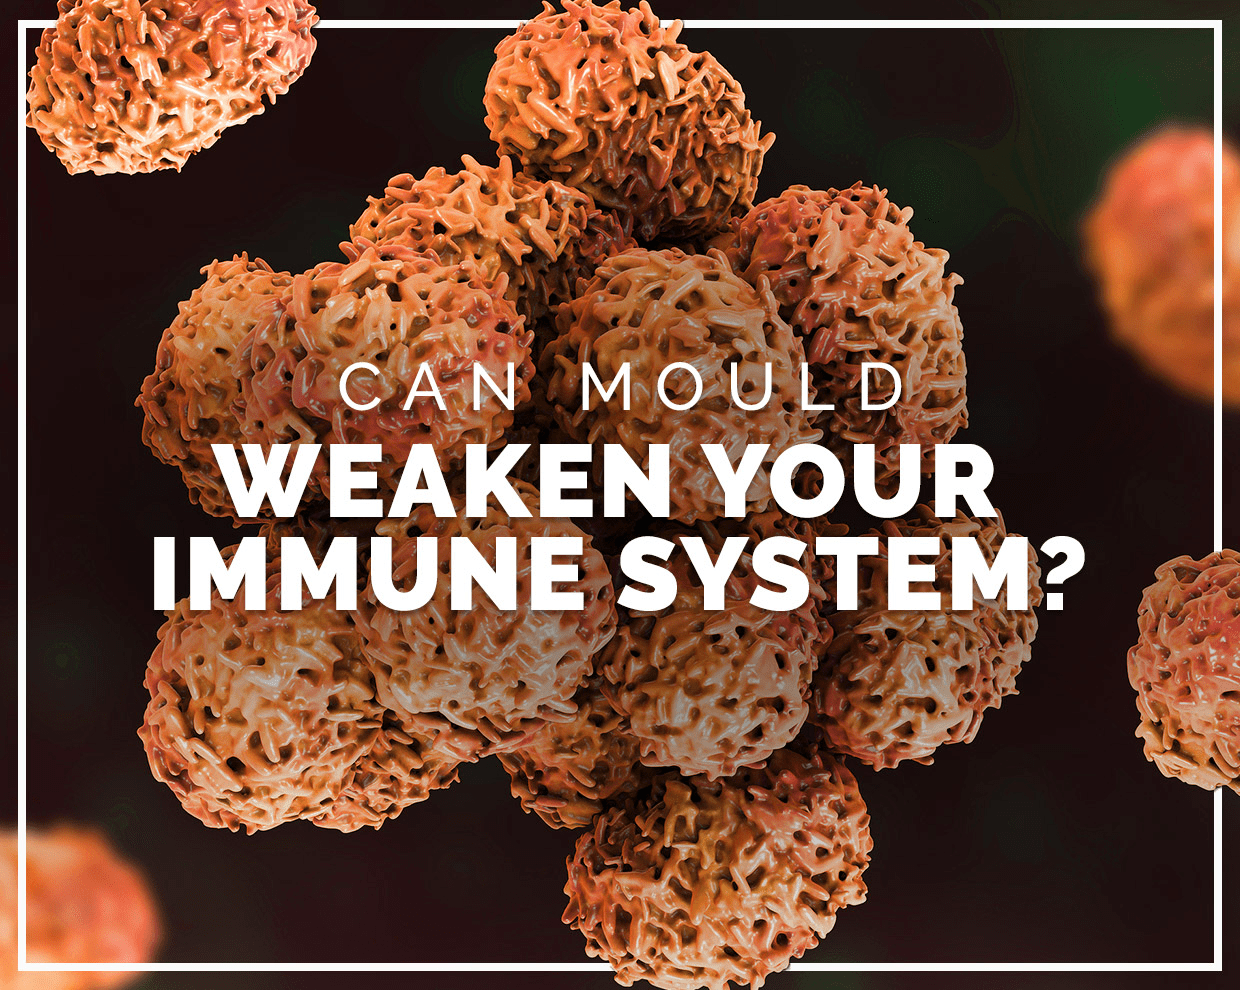 Can mould weaken your immune system? 